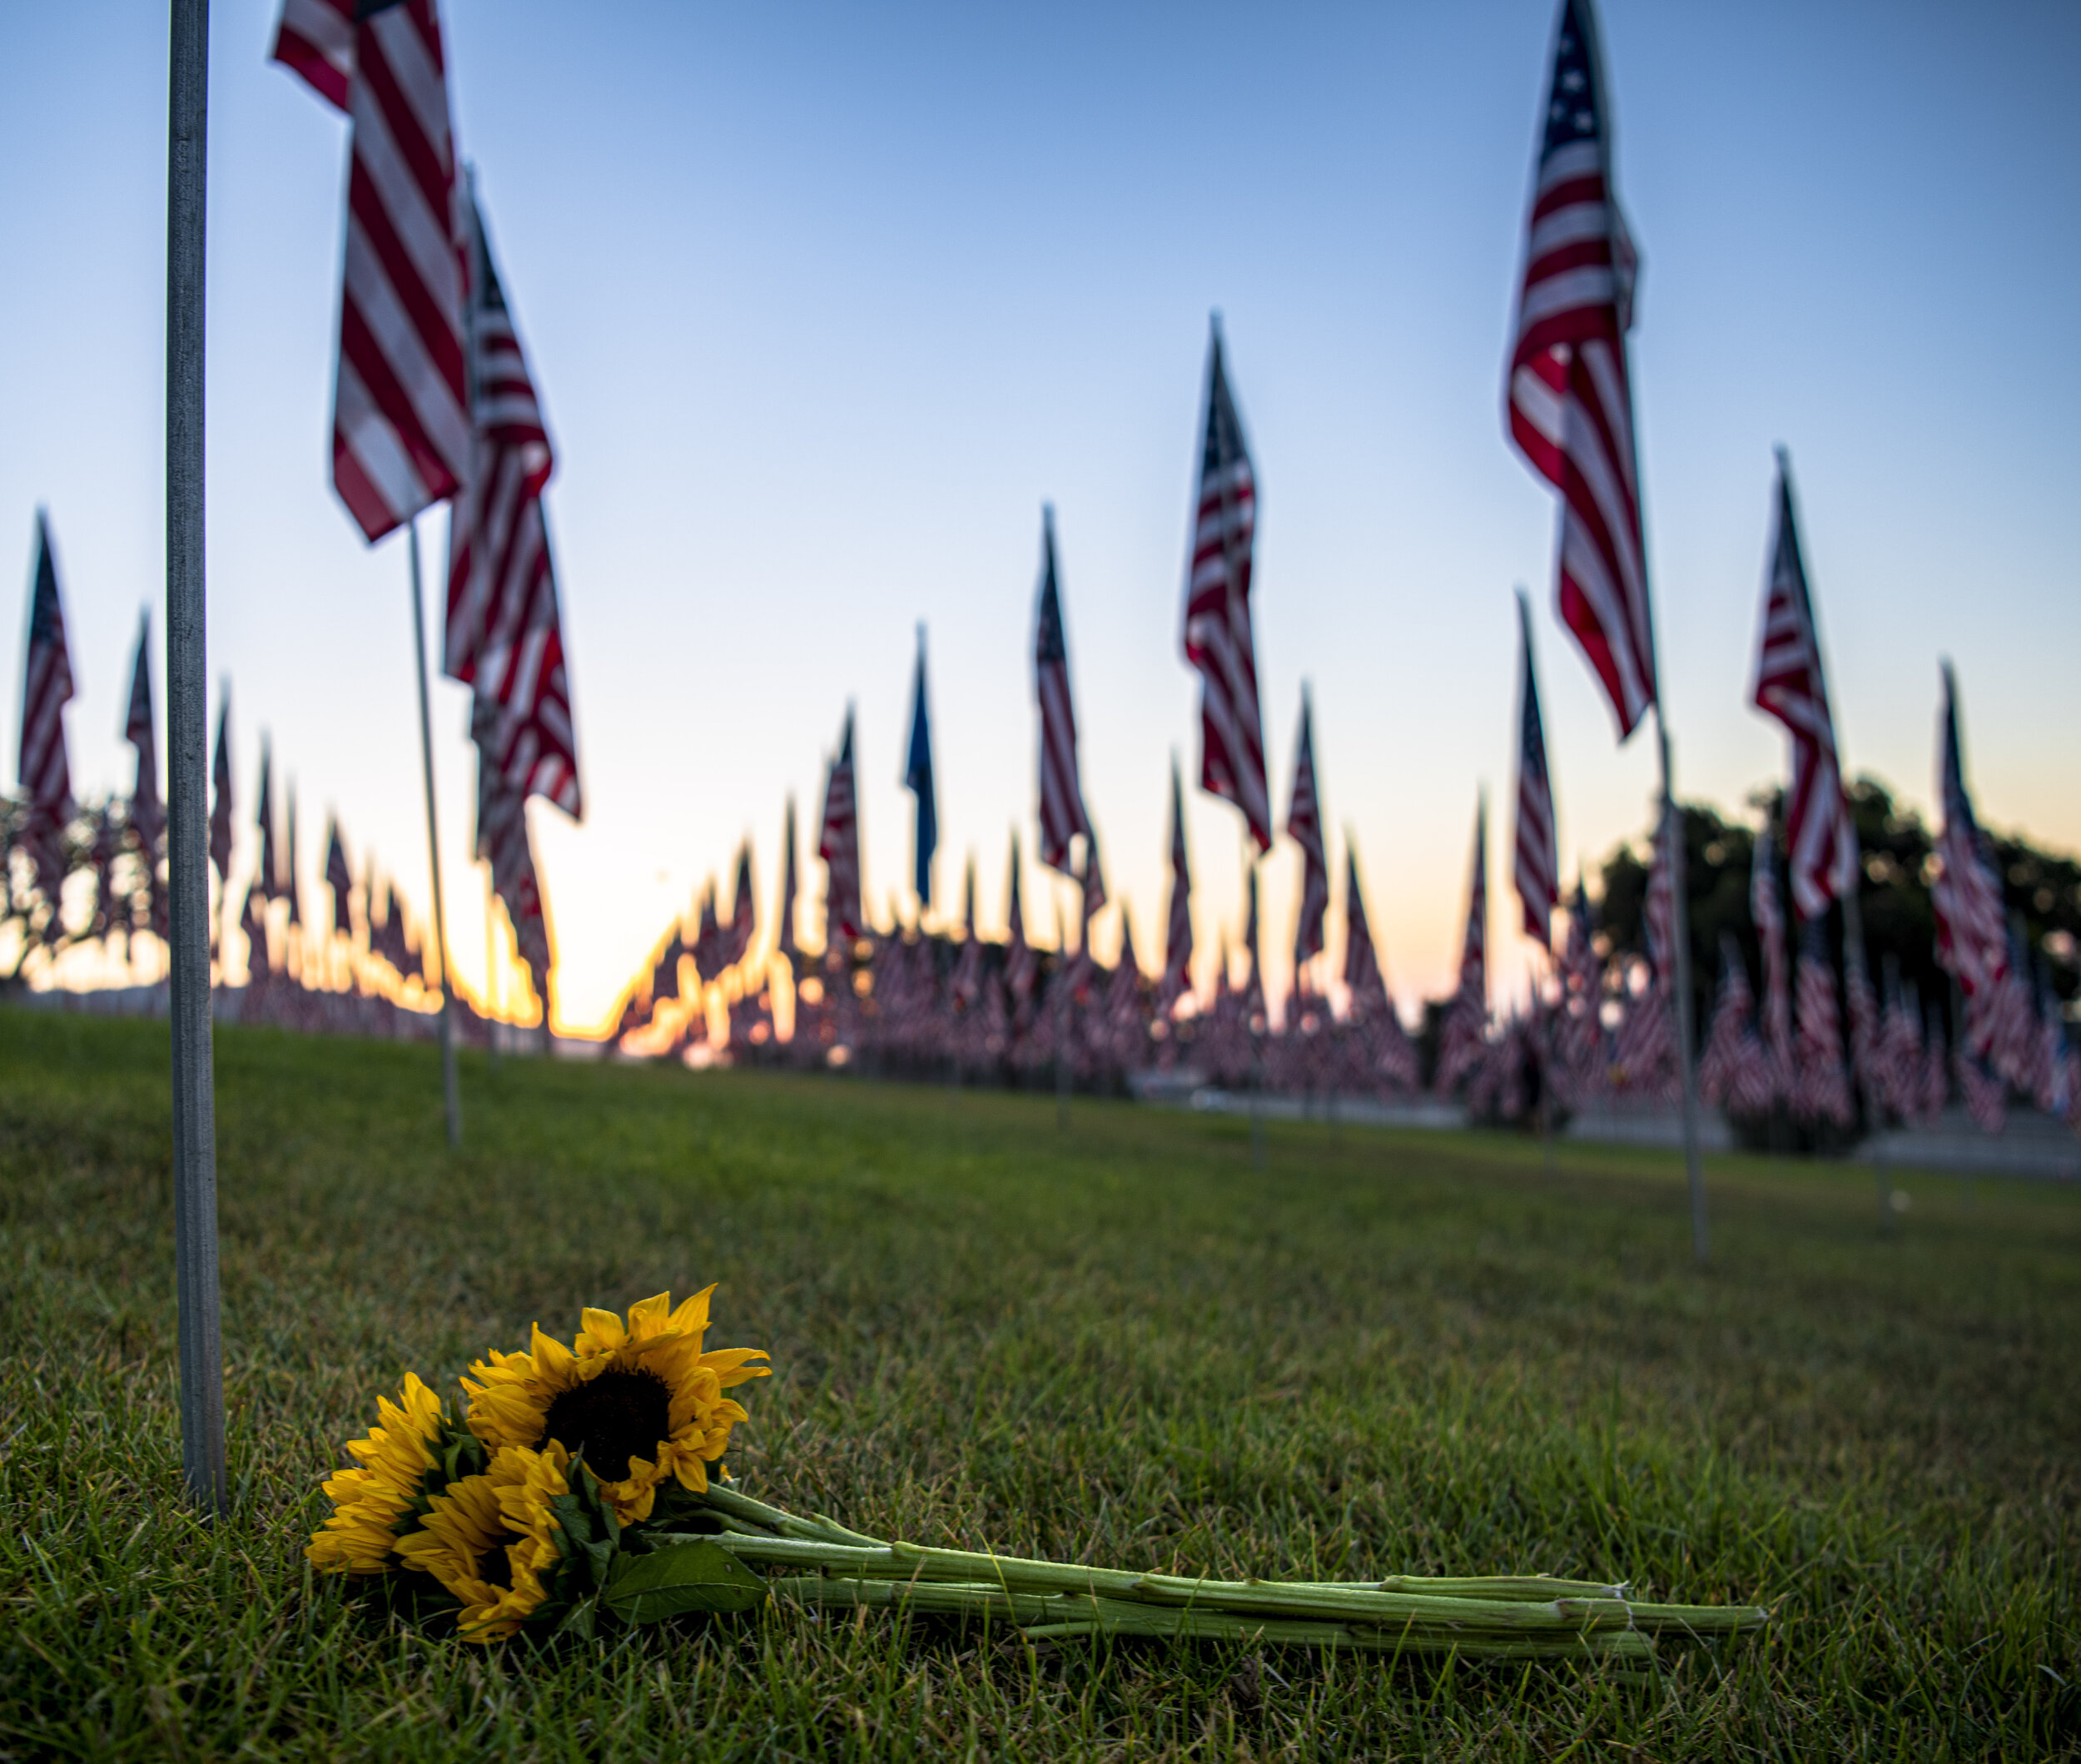  Sunflowers lay at the base of the Flags set out for each American lost in the 9/11 attacks 20 years ago today on September 11, 2021, at Pepperdine University located in Malibu, Calif. (Jon Putman | The Corsair) 